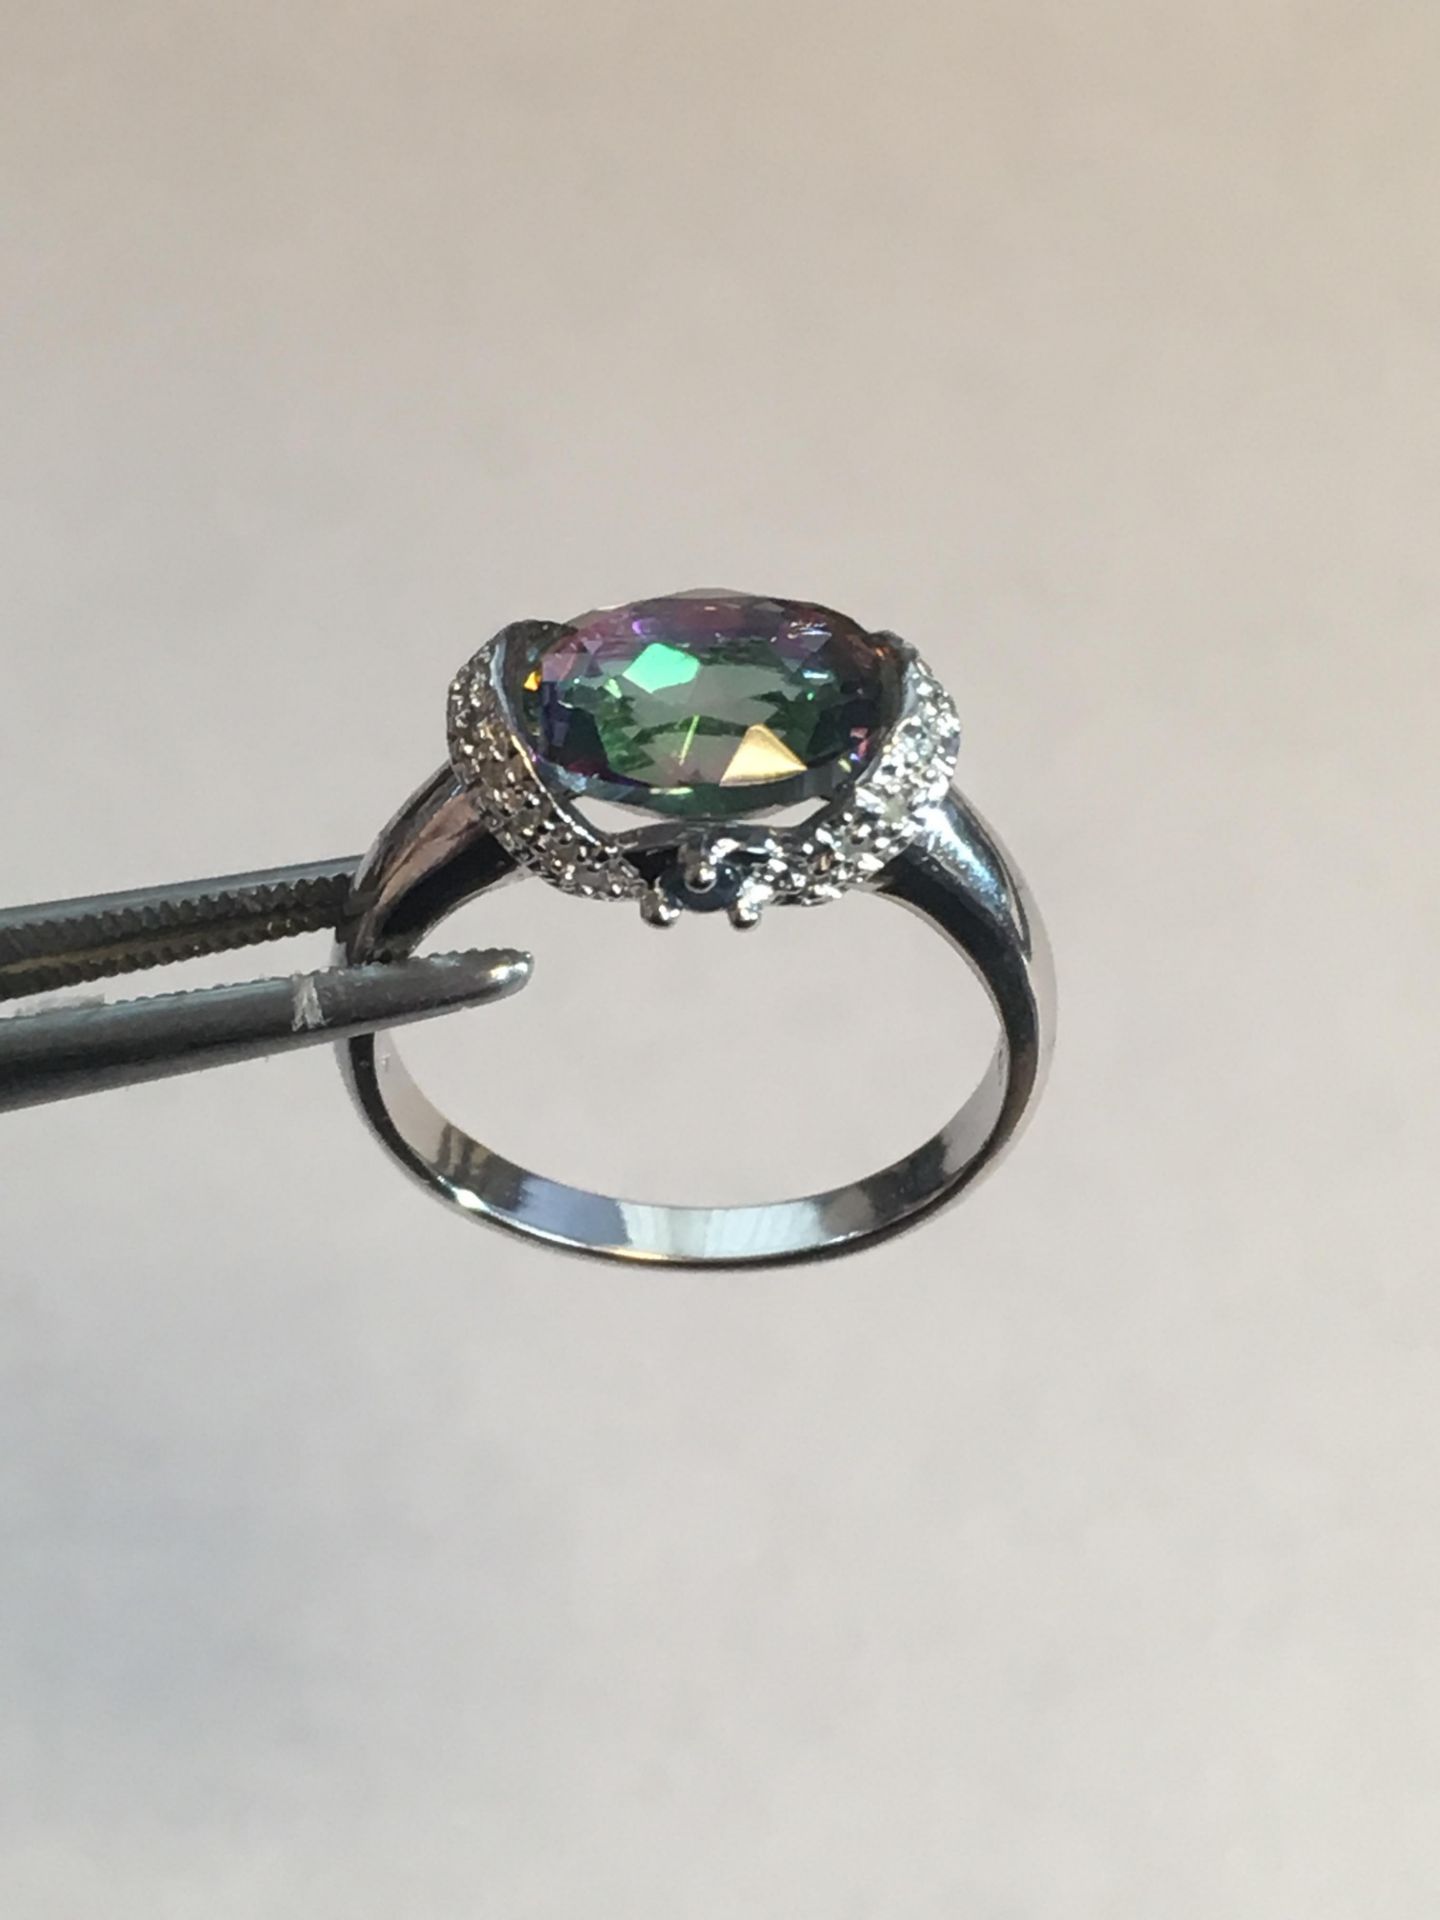 Mystic Gemstome and diamond sterling silver Ring - Image 2 of 2